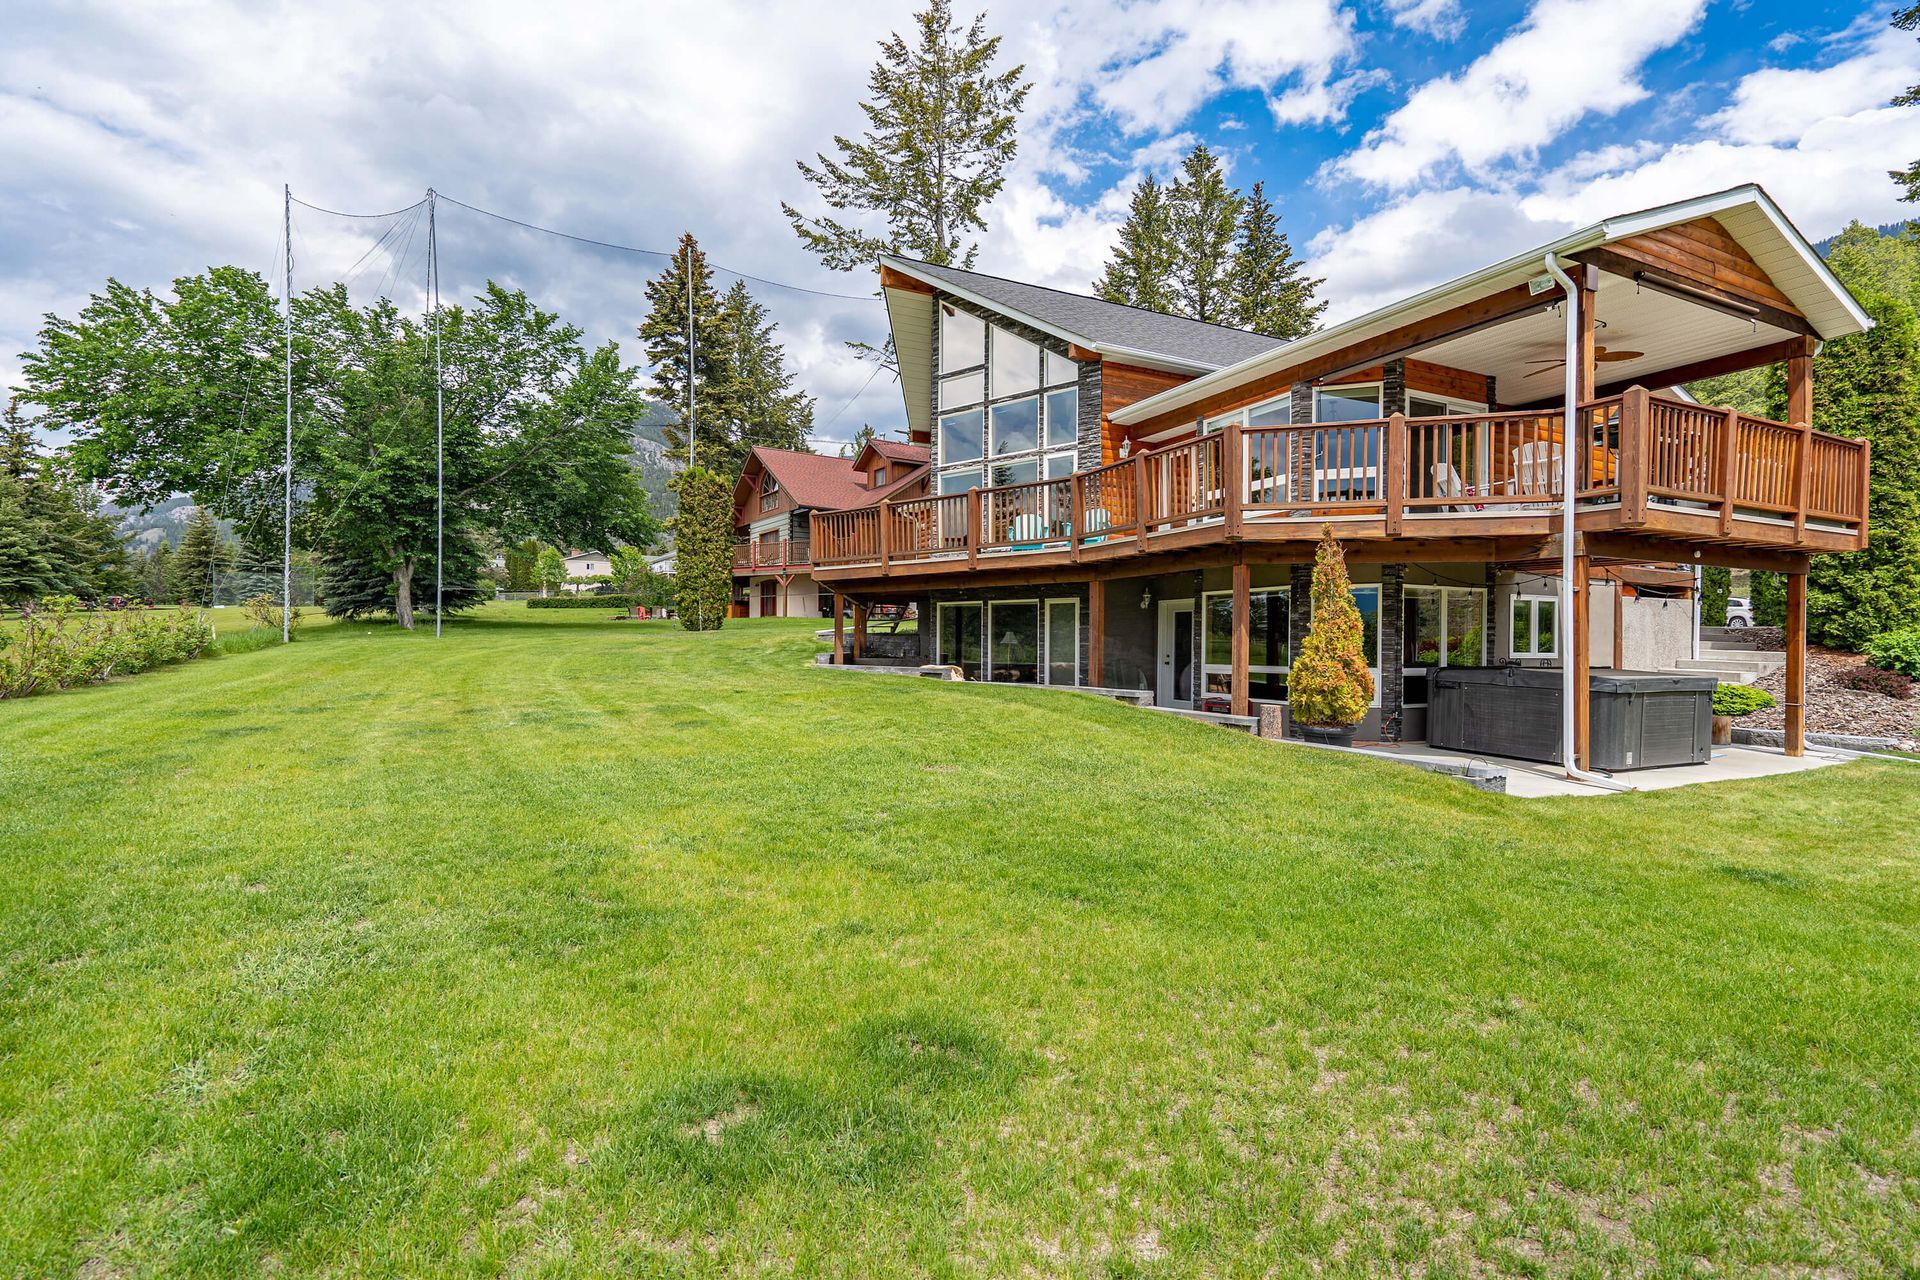 Exterior of the Fairway17, a Windermere BC Vacation Rental hosted by Aisling Baile Property Management.